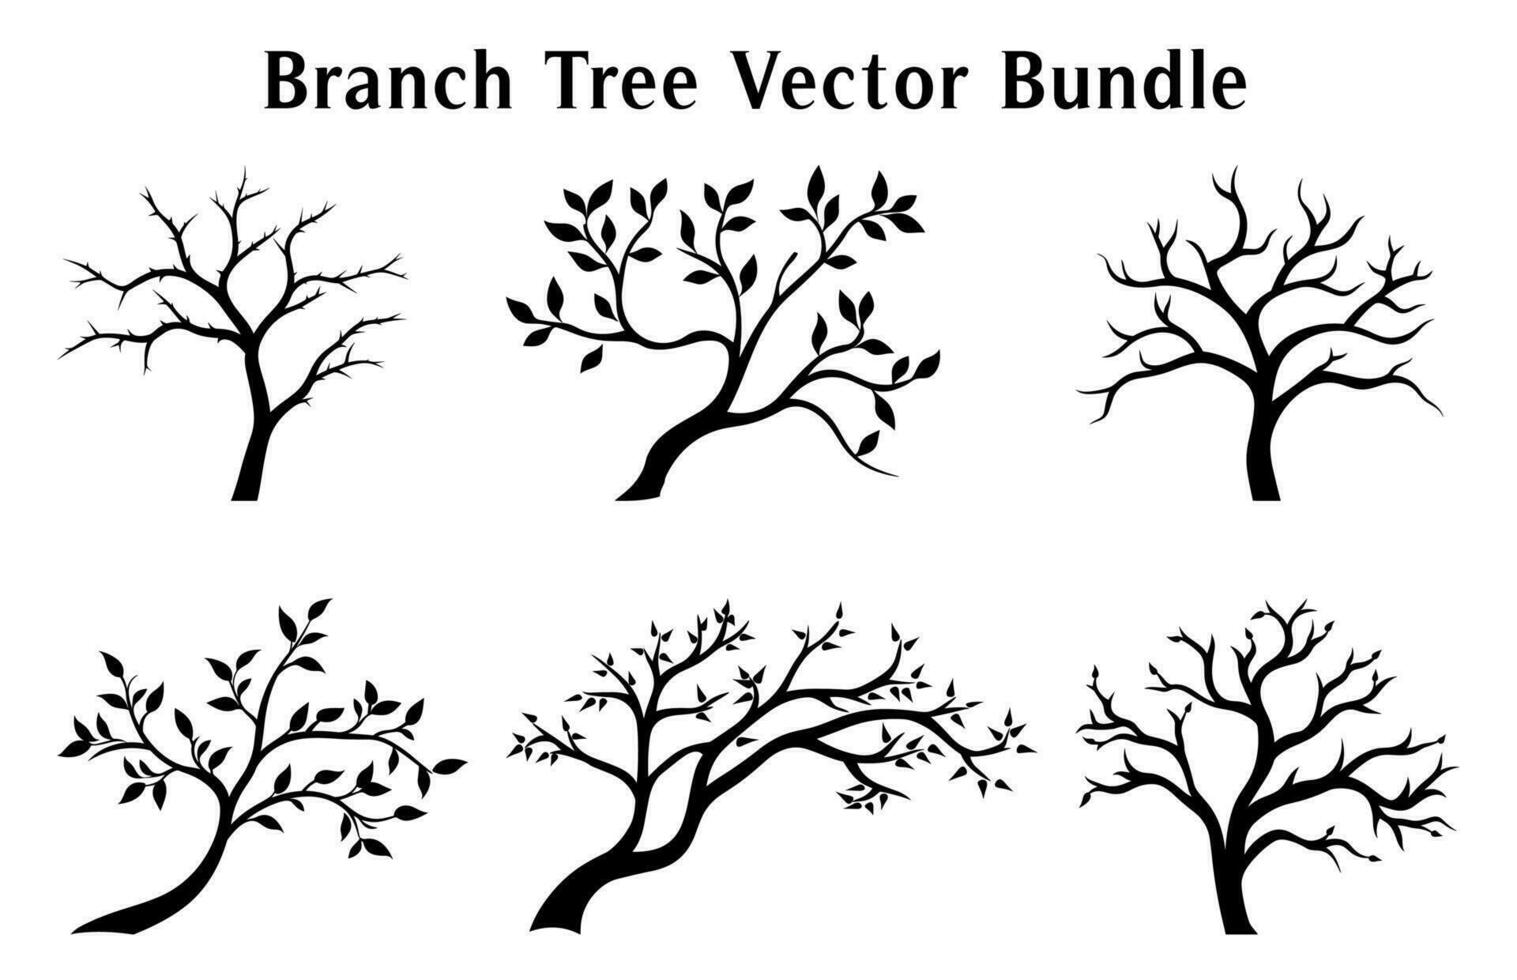 Branch Trees Vector Black Silhouettes, Set of Branch Tree icon clipart isolated on a white background